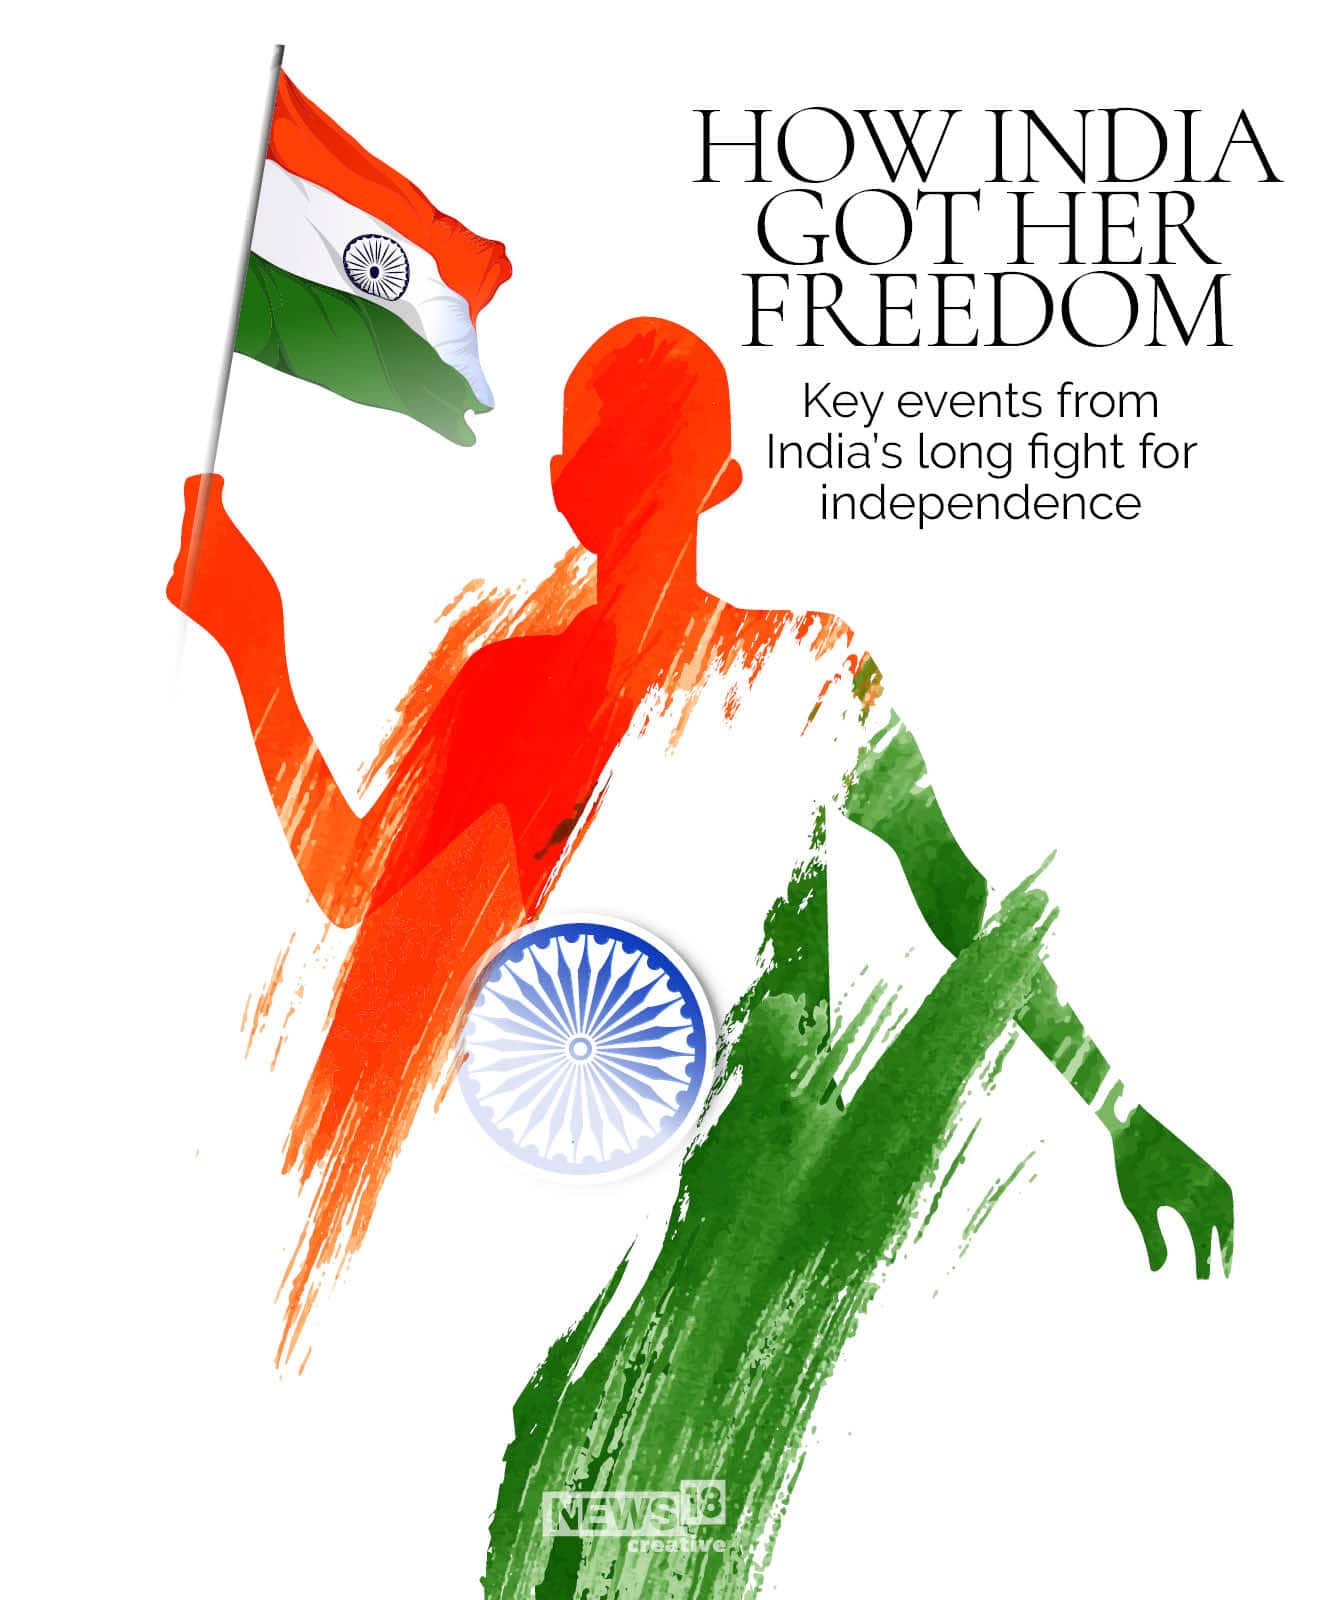 74th Independence Day: Here Are The Key Events From India's Freedom Struggle